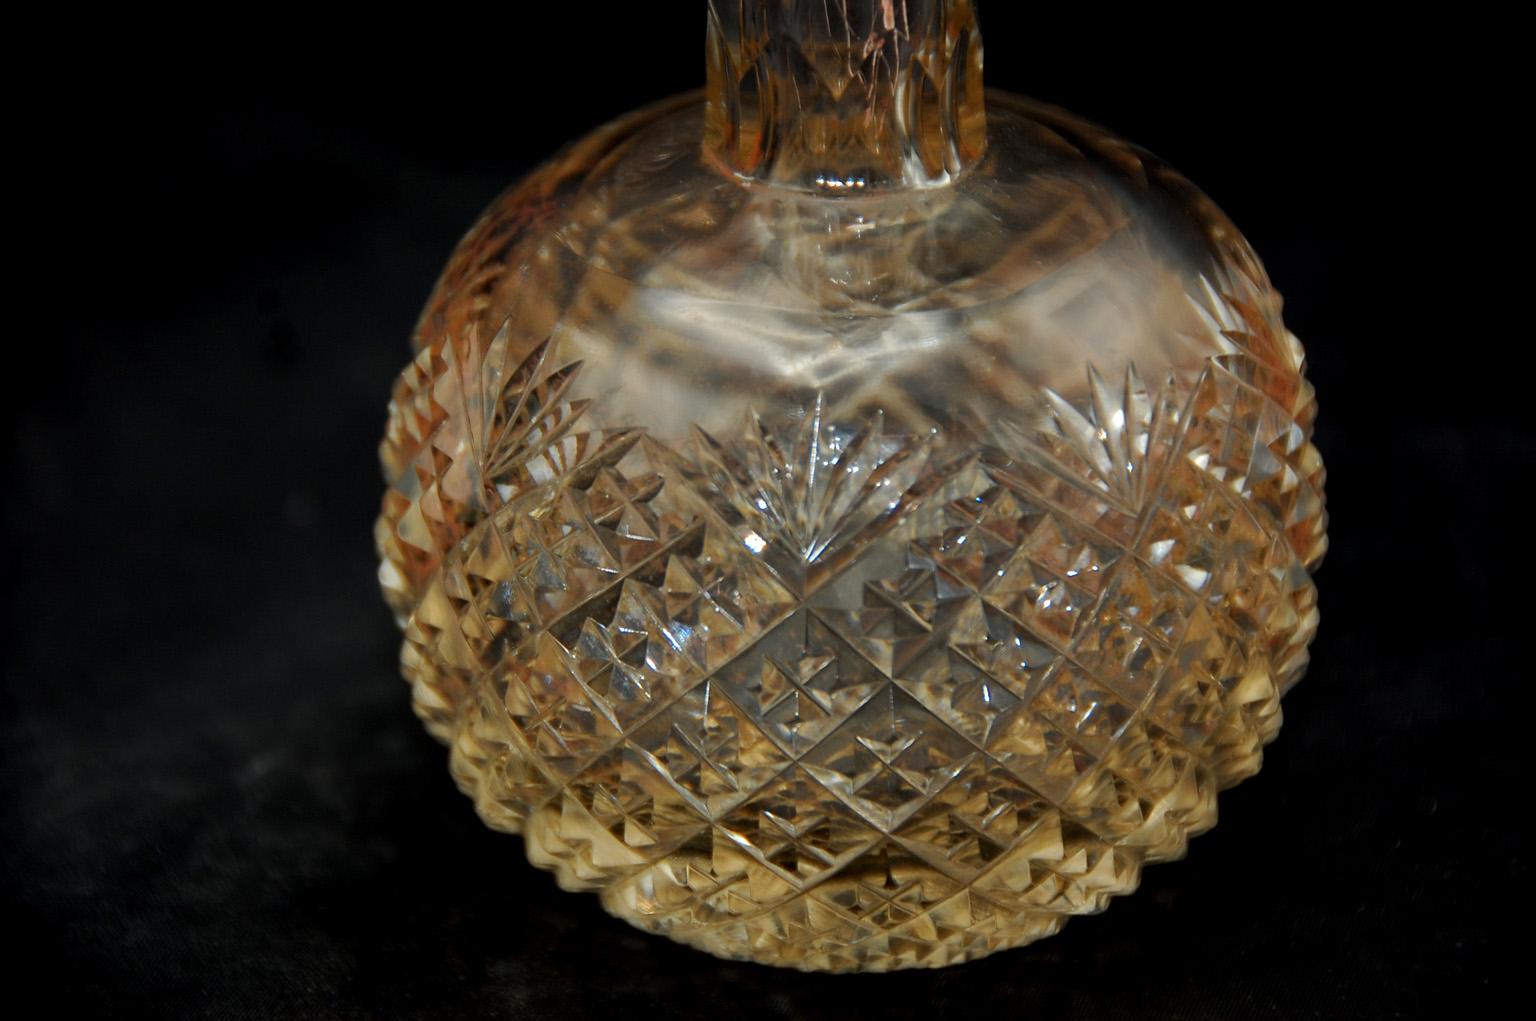 English Victorian sterling silver and deeply cut glass, hand blown scent bottle. This period perfume bottle has a screw on lid with original cork liner which provides a complete seal so expensive scents cannot escape from the bottle inadvertently.